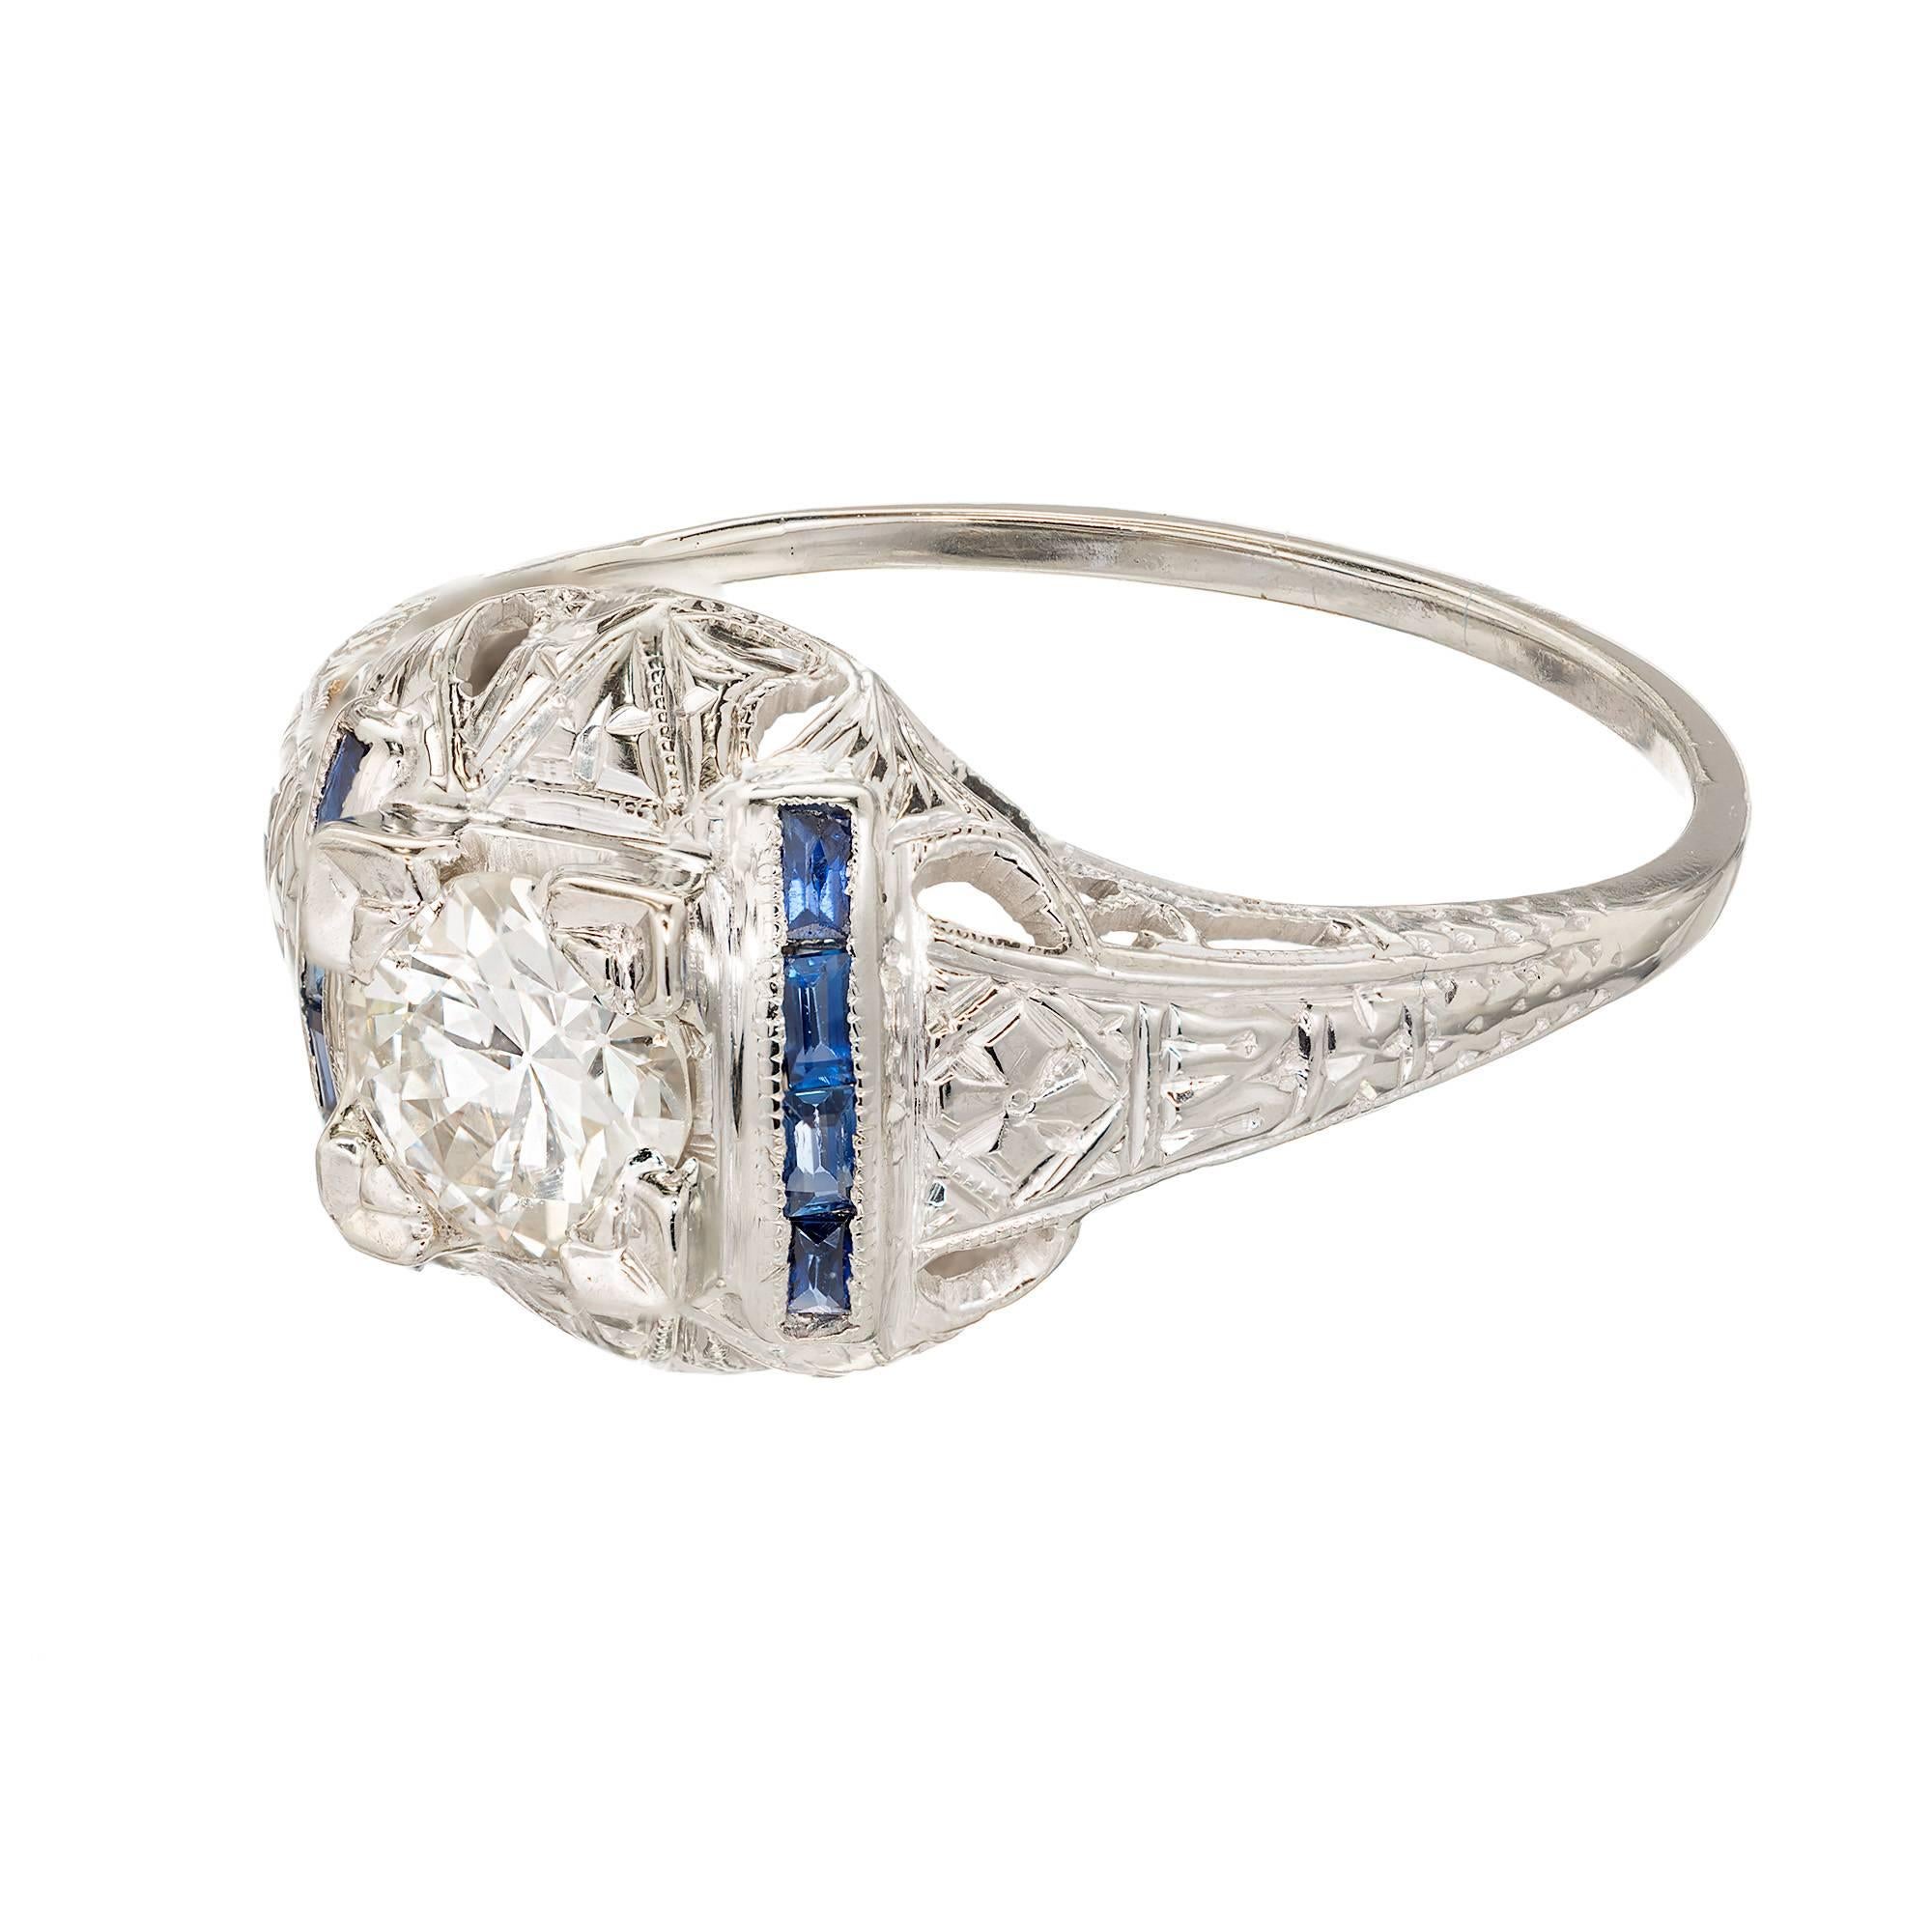 Handmade 1930s Art Deco filigree engagement ring. Domed top detailed with hand engraving. The center diamond is flanked by two rows of genuine calibre cut blue Sapphire baguettes.  The center diamond is a wonderful bright white transitional cut